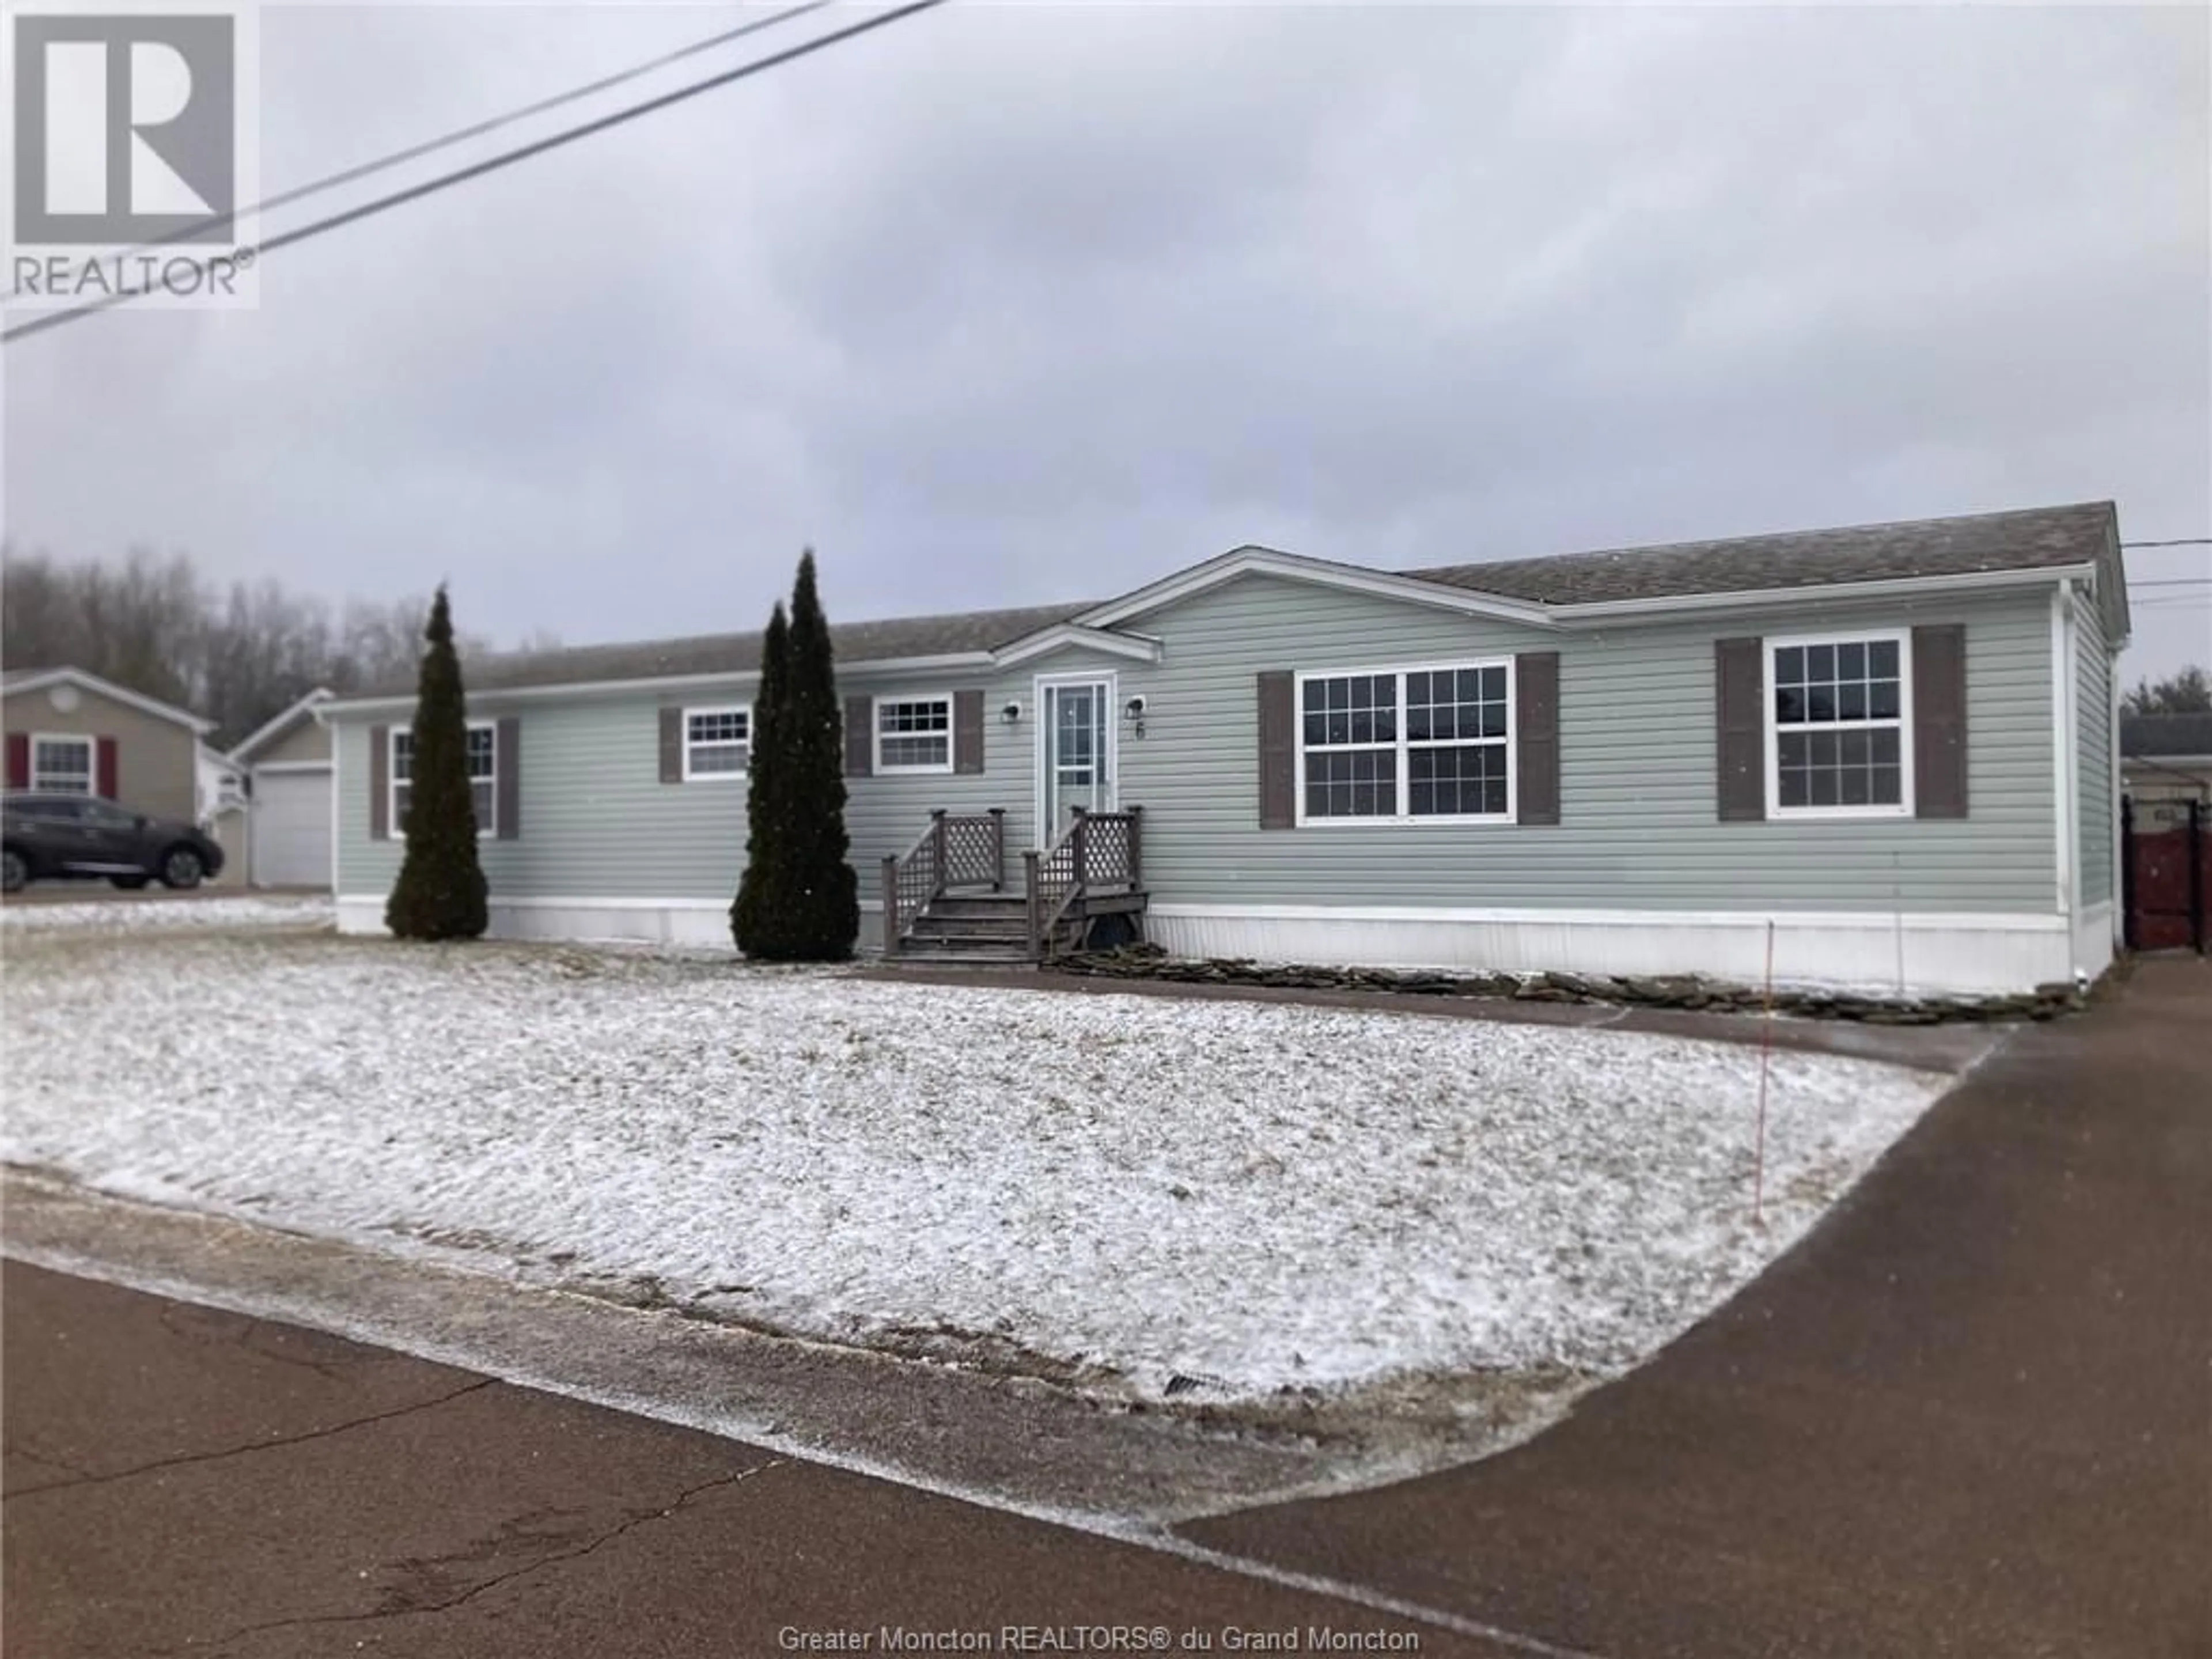 Home with unknown exterior material for 6 Cypress Tree, Moncton New Brunswick E1H3R4